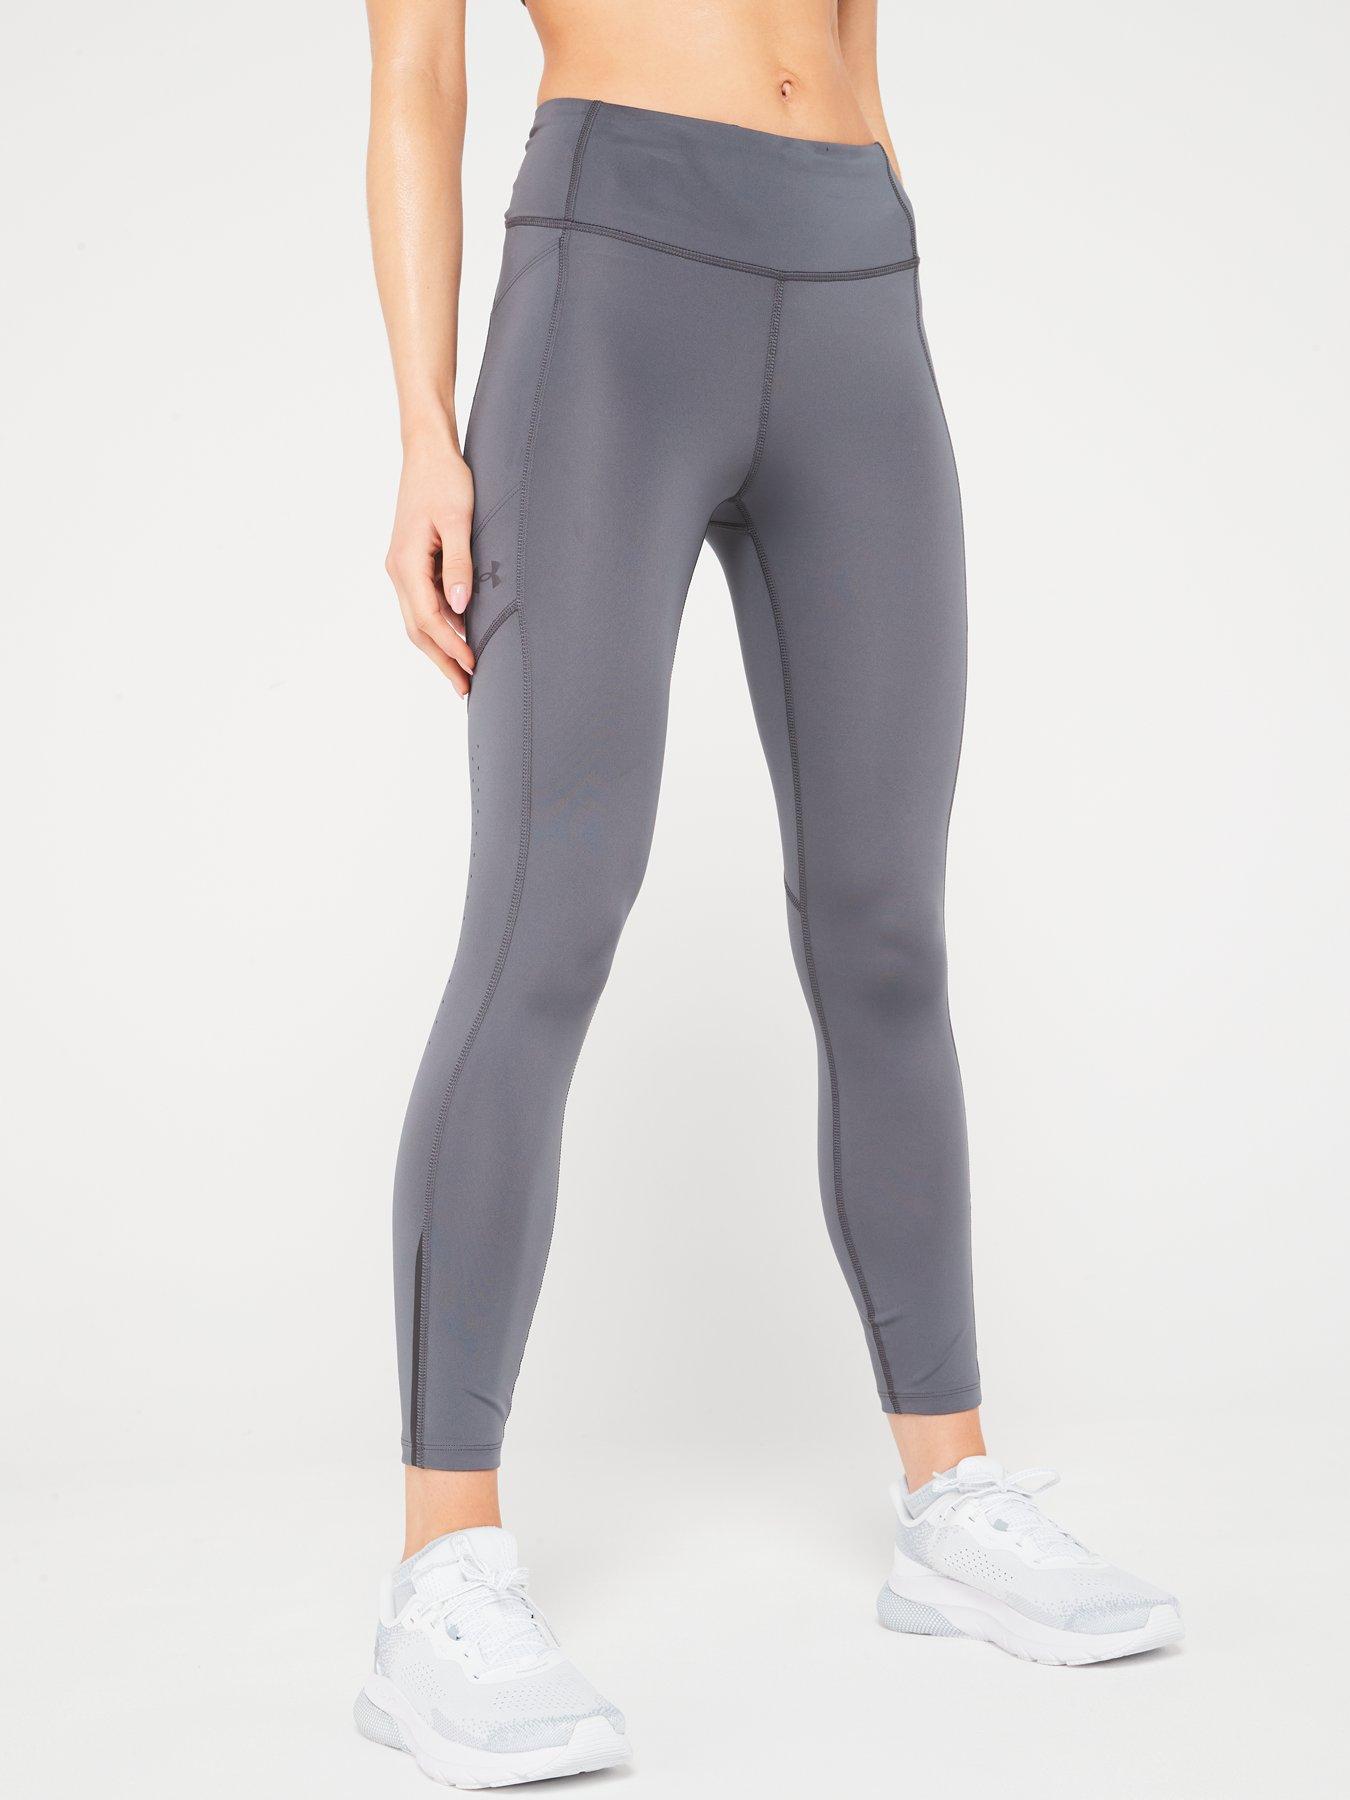 UNDER ARMOUR Womens Training Motion Ankle Legging - Grey